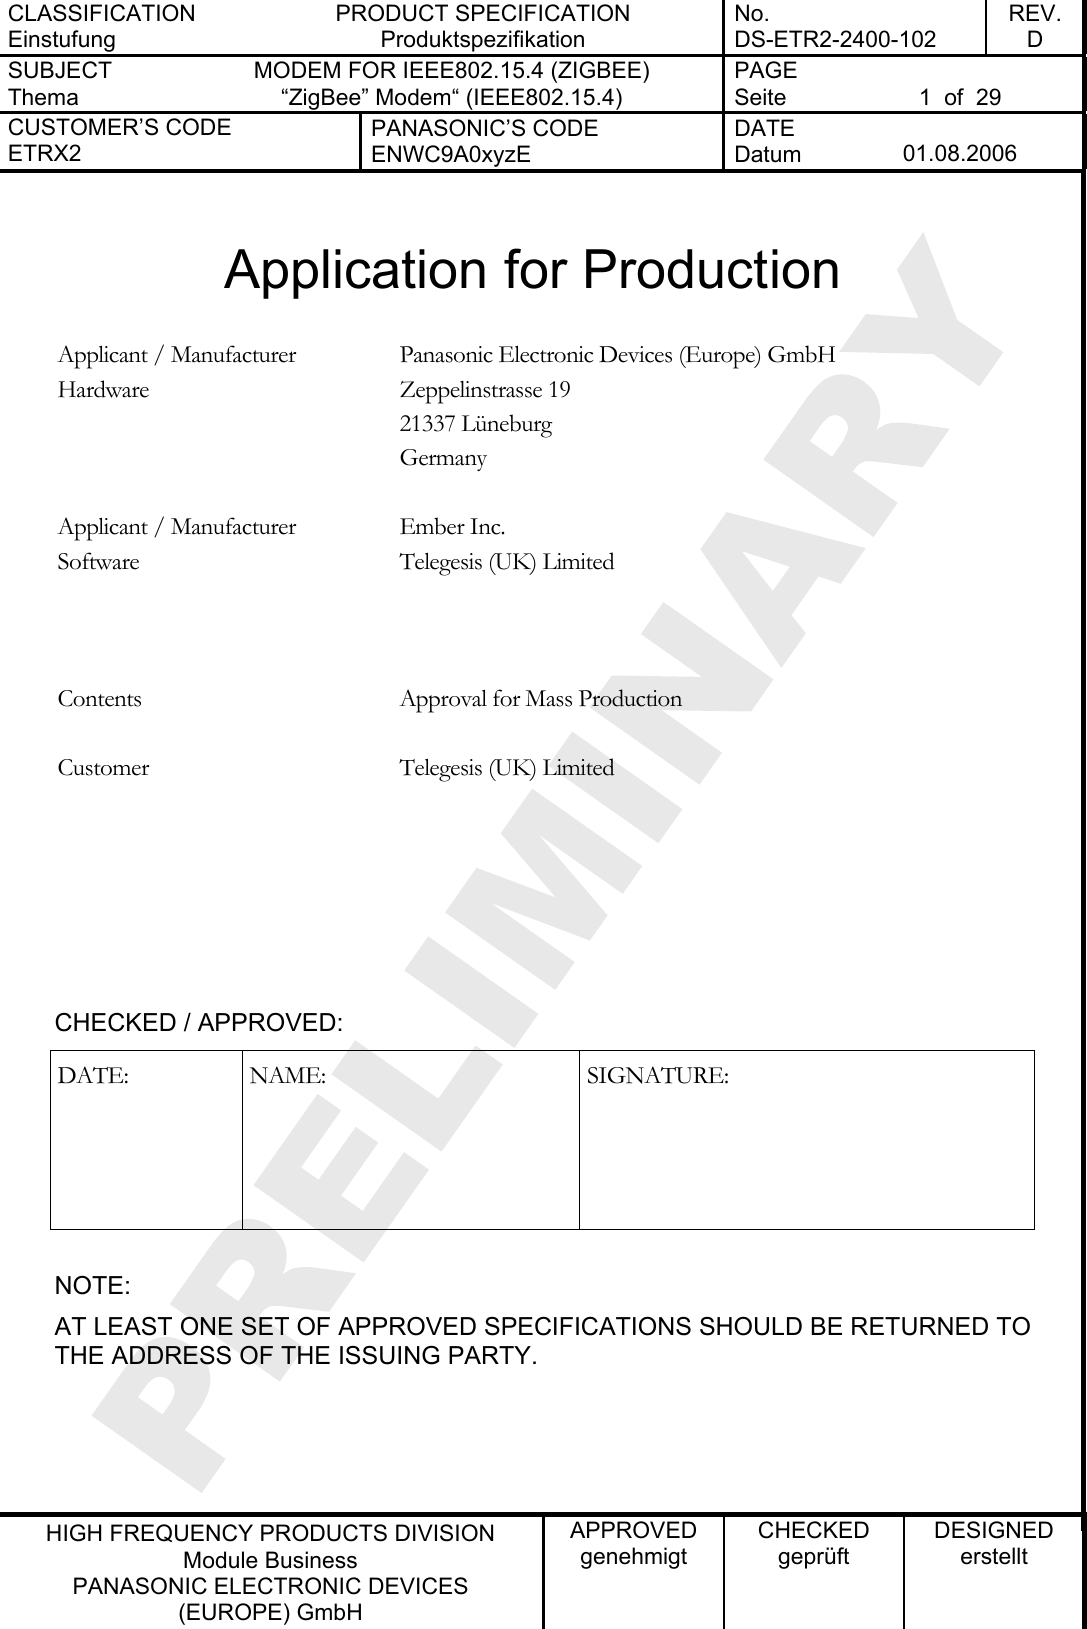 CLASSIFICATION Einstufung PRODUCT SPECIFICATION Produktspezifikation No. DS-ETR2-2400-102 REV. D SUBJECT Thema MODEM FOR IEEE802.15.4 (ZIGBEE) “ZigBee” Modem“ (IEEE802.15.4)   PAGE Seite  1  of  29 CUSTOMER’S CODE ETRX2 PANASONIC’S CODE ENWC9A0xyzE DATE Datum  01.08.2006   HIGH FREQUENCY PRODUCTS DIVISION Module Business PANASONIC ELECTRONIC DEVICES  (EUROPE) GmbH APPROVED genehmigt CHECKED geprüft DESIGNED erstellt  Application for Production  Panasonic Electronic Devices (Europe) GmbH Zeppelinstrasse 19 21337 Lüneburg Applicant / Manufacturer Hardware Germany   Ember Inc. Telegesis (UK) Limited  Applicant / Manufacturer Software    Contents  Approval for Mass Production   Telegesis (UK) Limited   Customer      CHECKED / APPROVED: DATE: NAME:  SIGNATURE:  NOTE: AT LEAST ONE SET OF APPROVED SPECIFICATIONS SHOULD BE RETURNED TO THE ADDRESS OF THE ISSUING PARTY.    